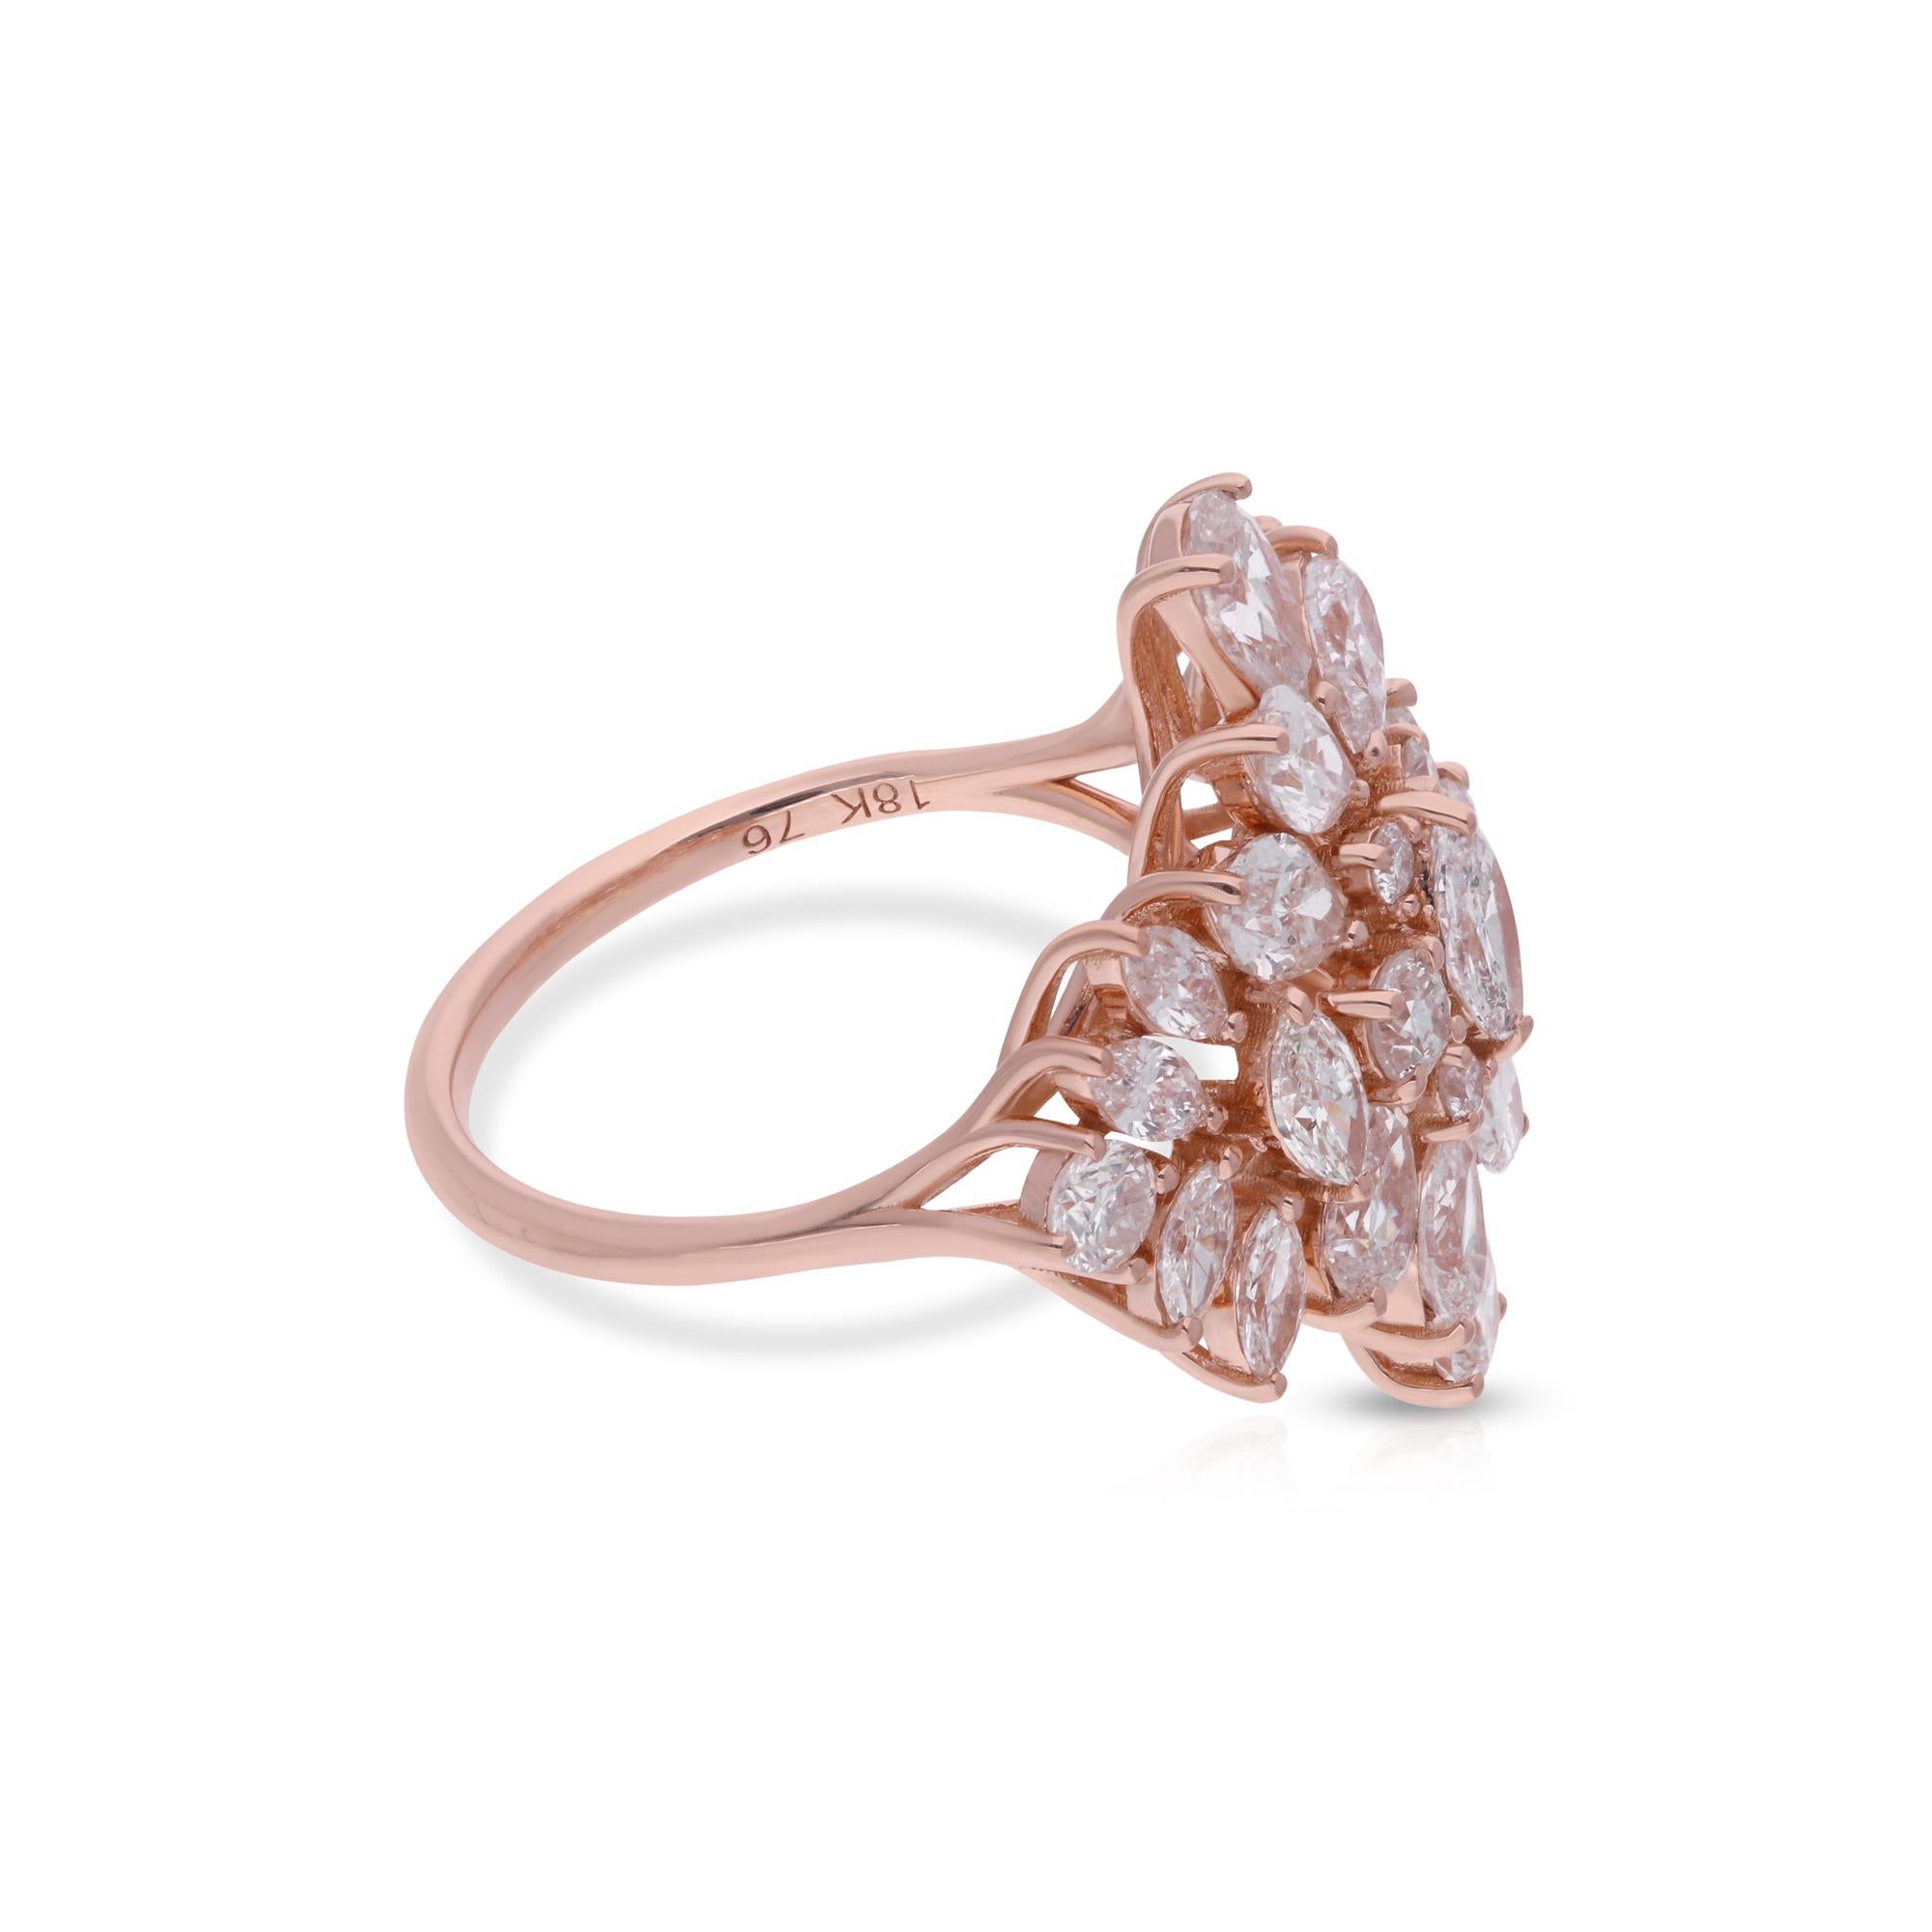 Immerse yourself in the luxurious splendor of this Natural 3.70 Carat Diamond Cocktail Ring, meticulously handcrafted in opulent 14 Karat Rose Gold. This exquisite piece of handmade jewelry is a celebration of elegance and sophistication, destined